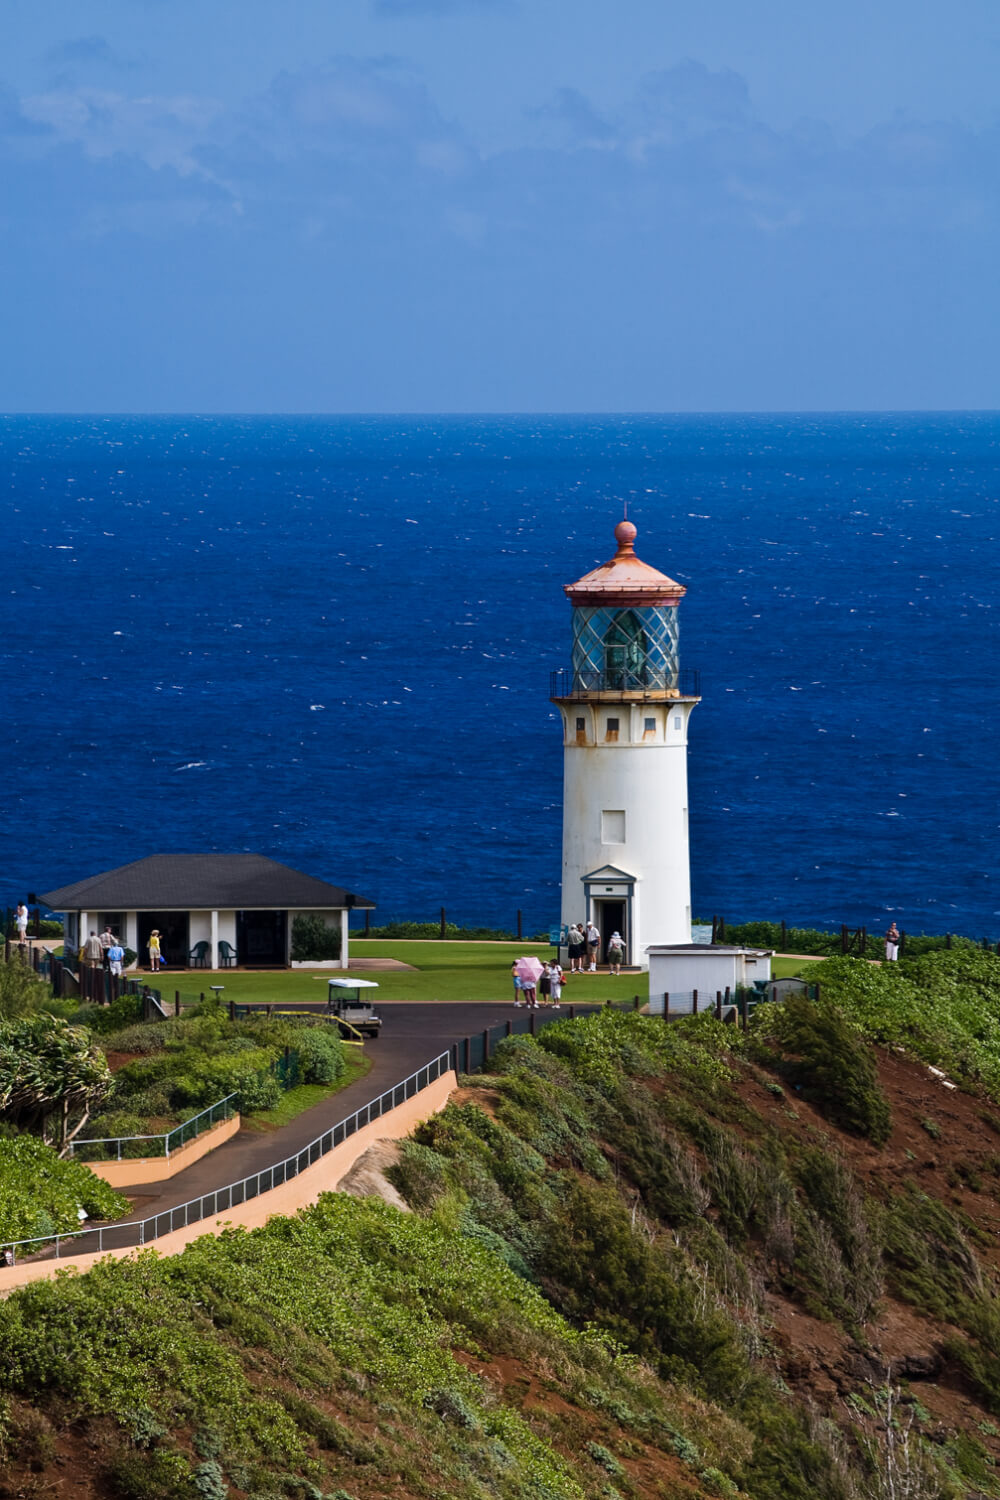 The Best 21 Free Things to do on Kauai with Kids featured by top Hawaii travel blog, Hawaii Travel with Kids: Kids will love running around Kilauea Lighthouse and looking for birds, one of the free things to do on Kauai for families